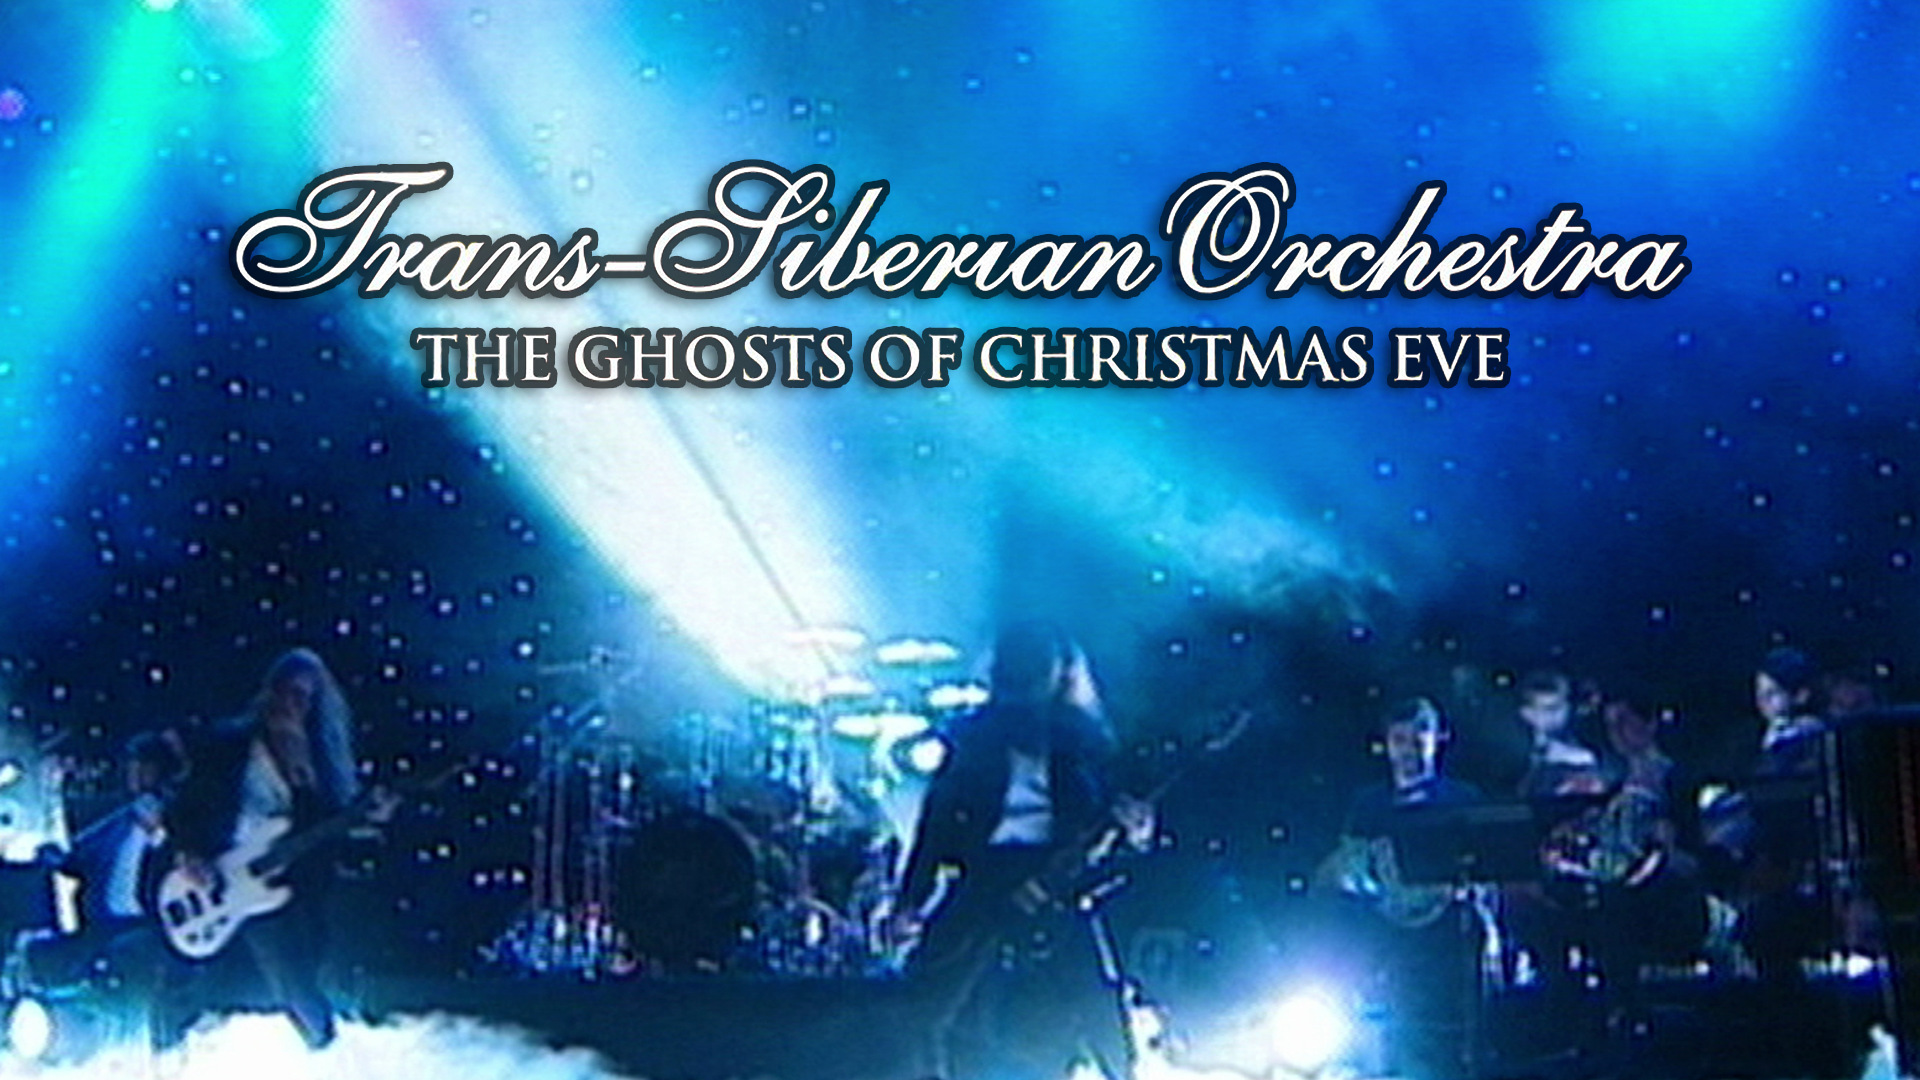 Trans-Siberian Orchestra: The Ghosts of Christmas Eve